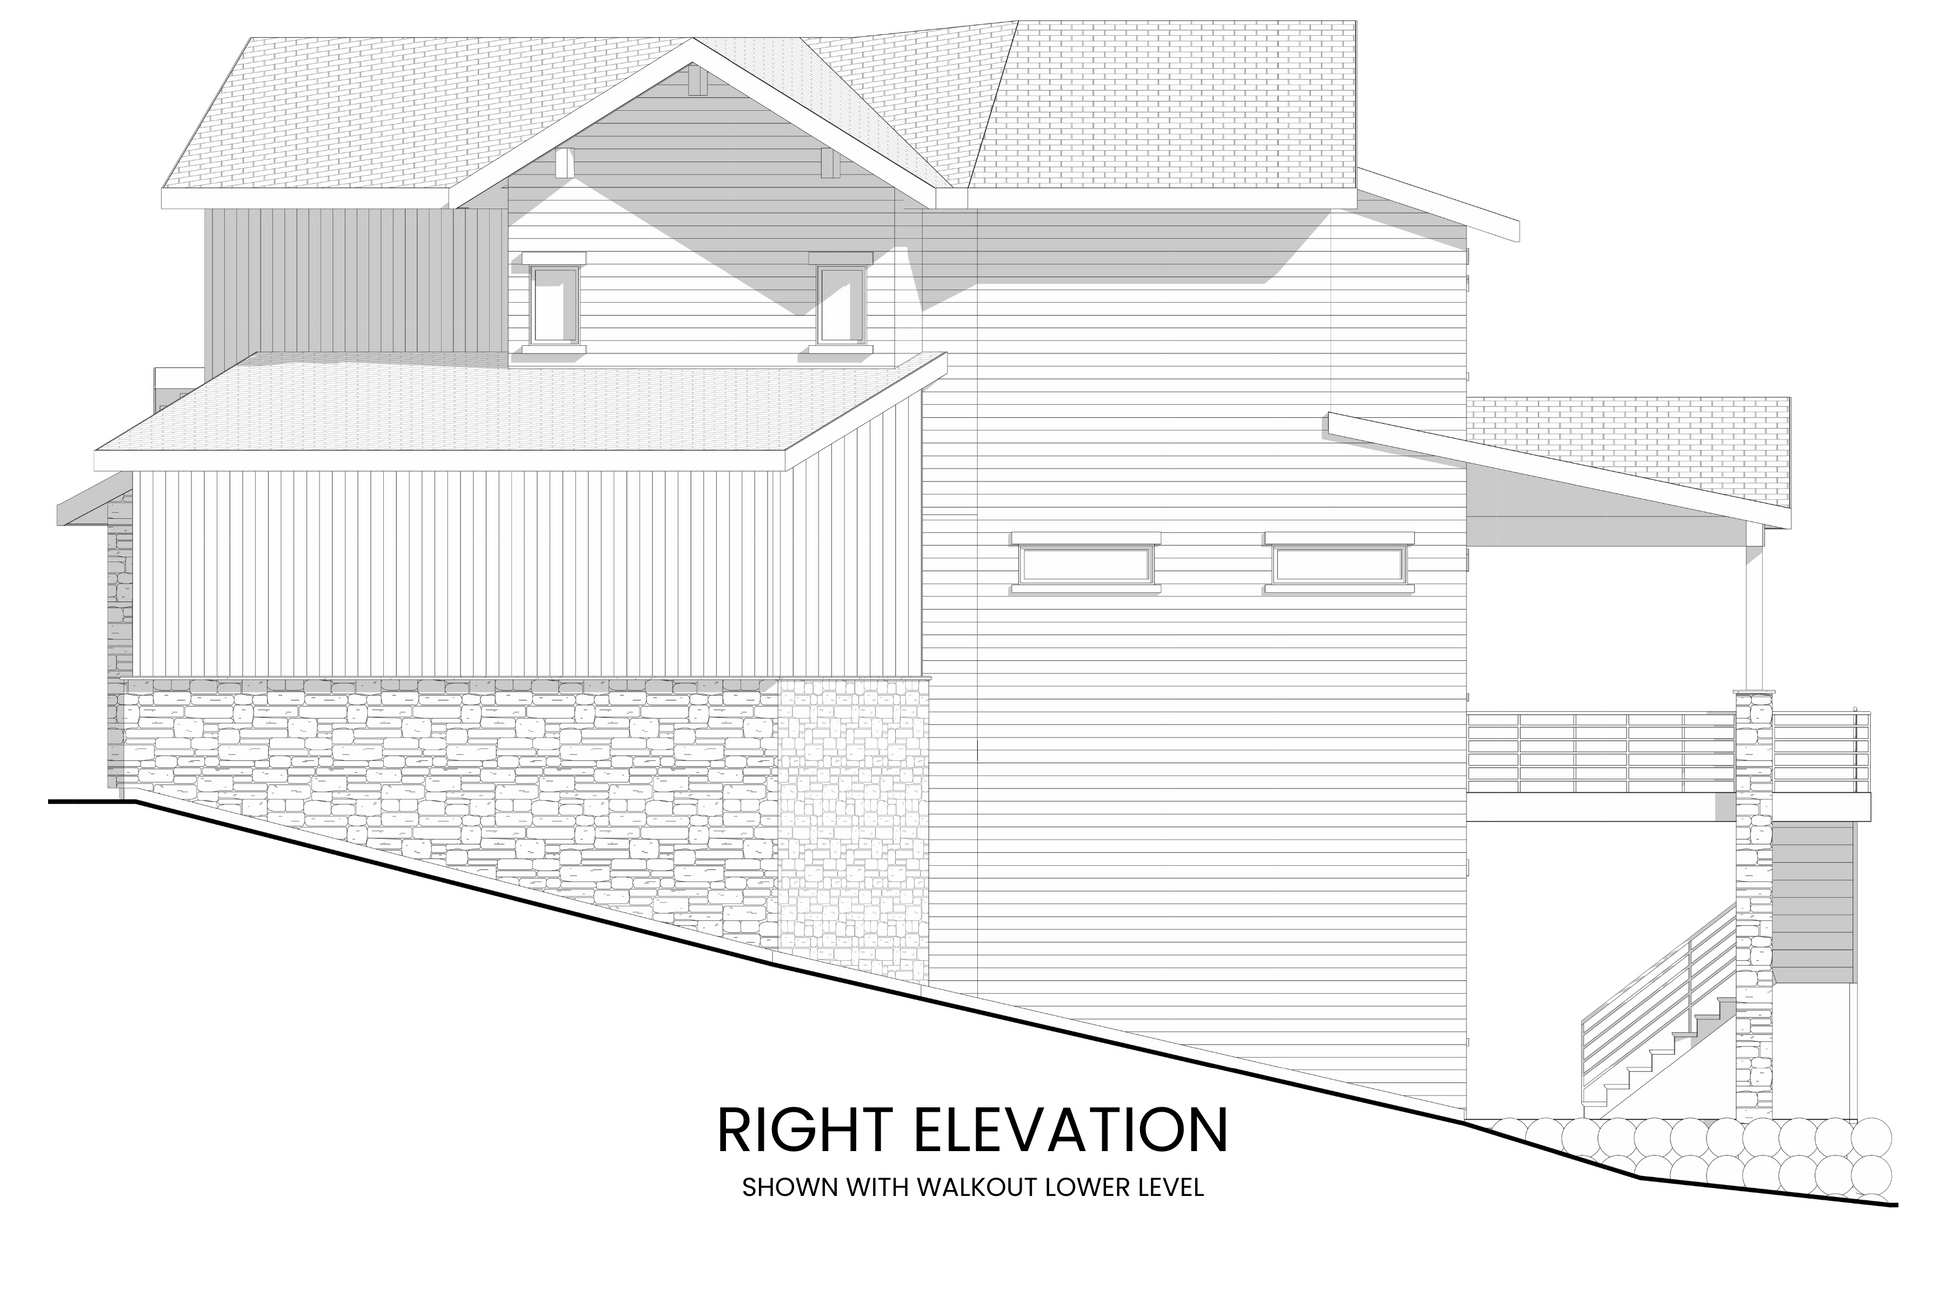 Modern-House-Plan-with-Four-Bedrooms-Right-Elevation-Rocky-Mountain-Plan-Company-Citadel-Peaks